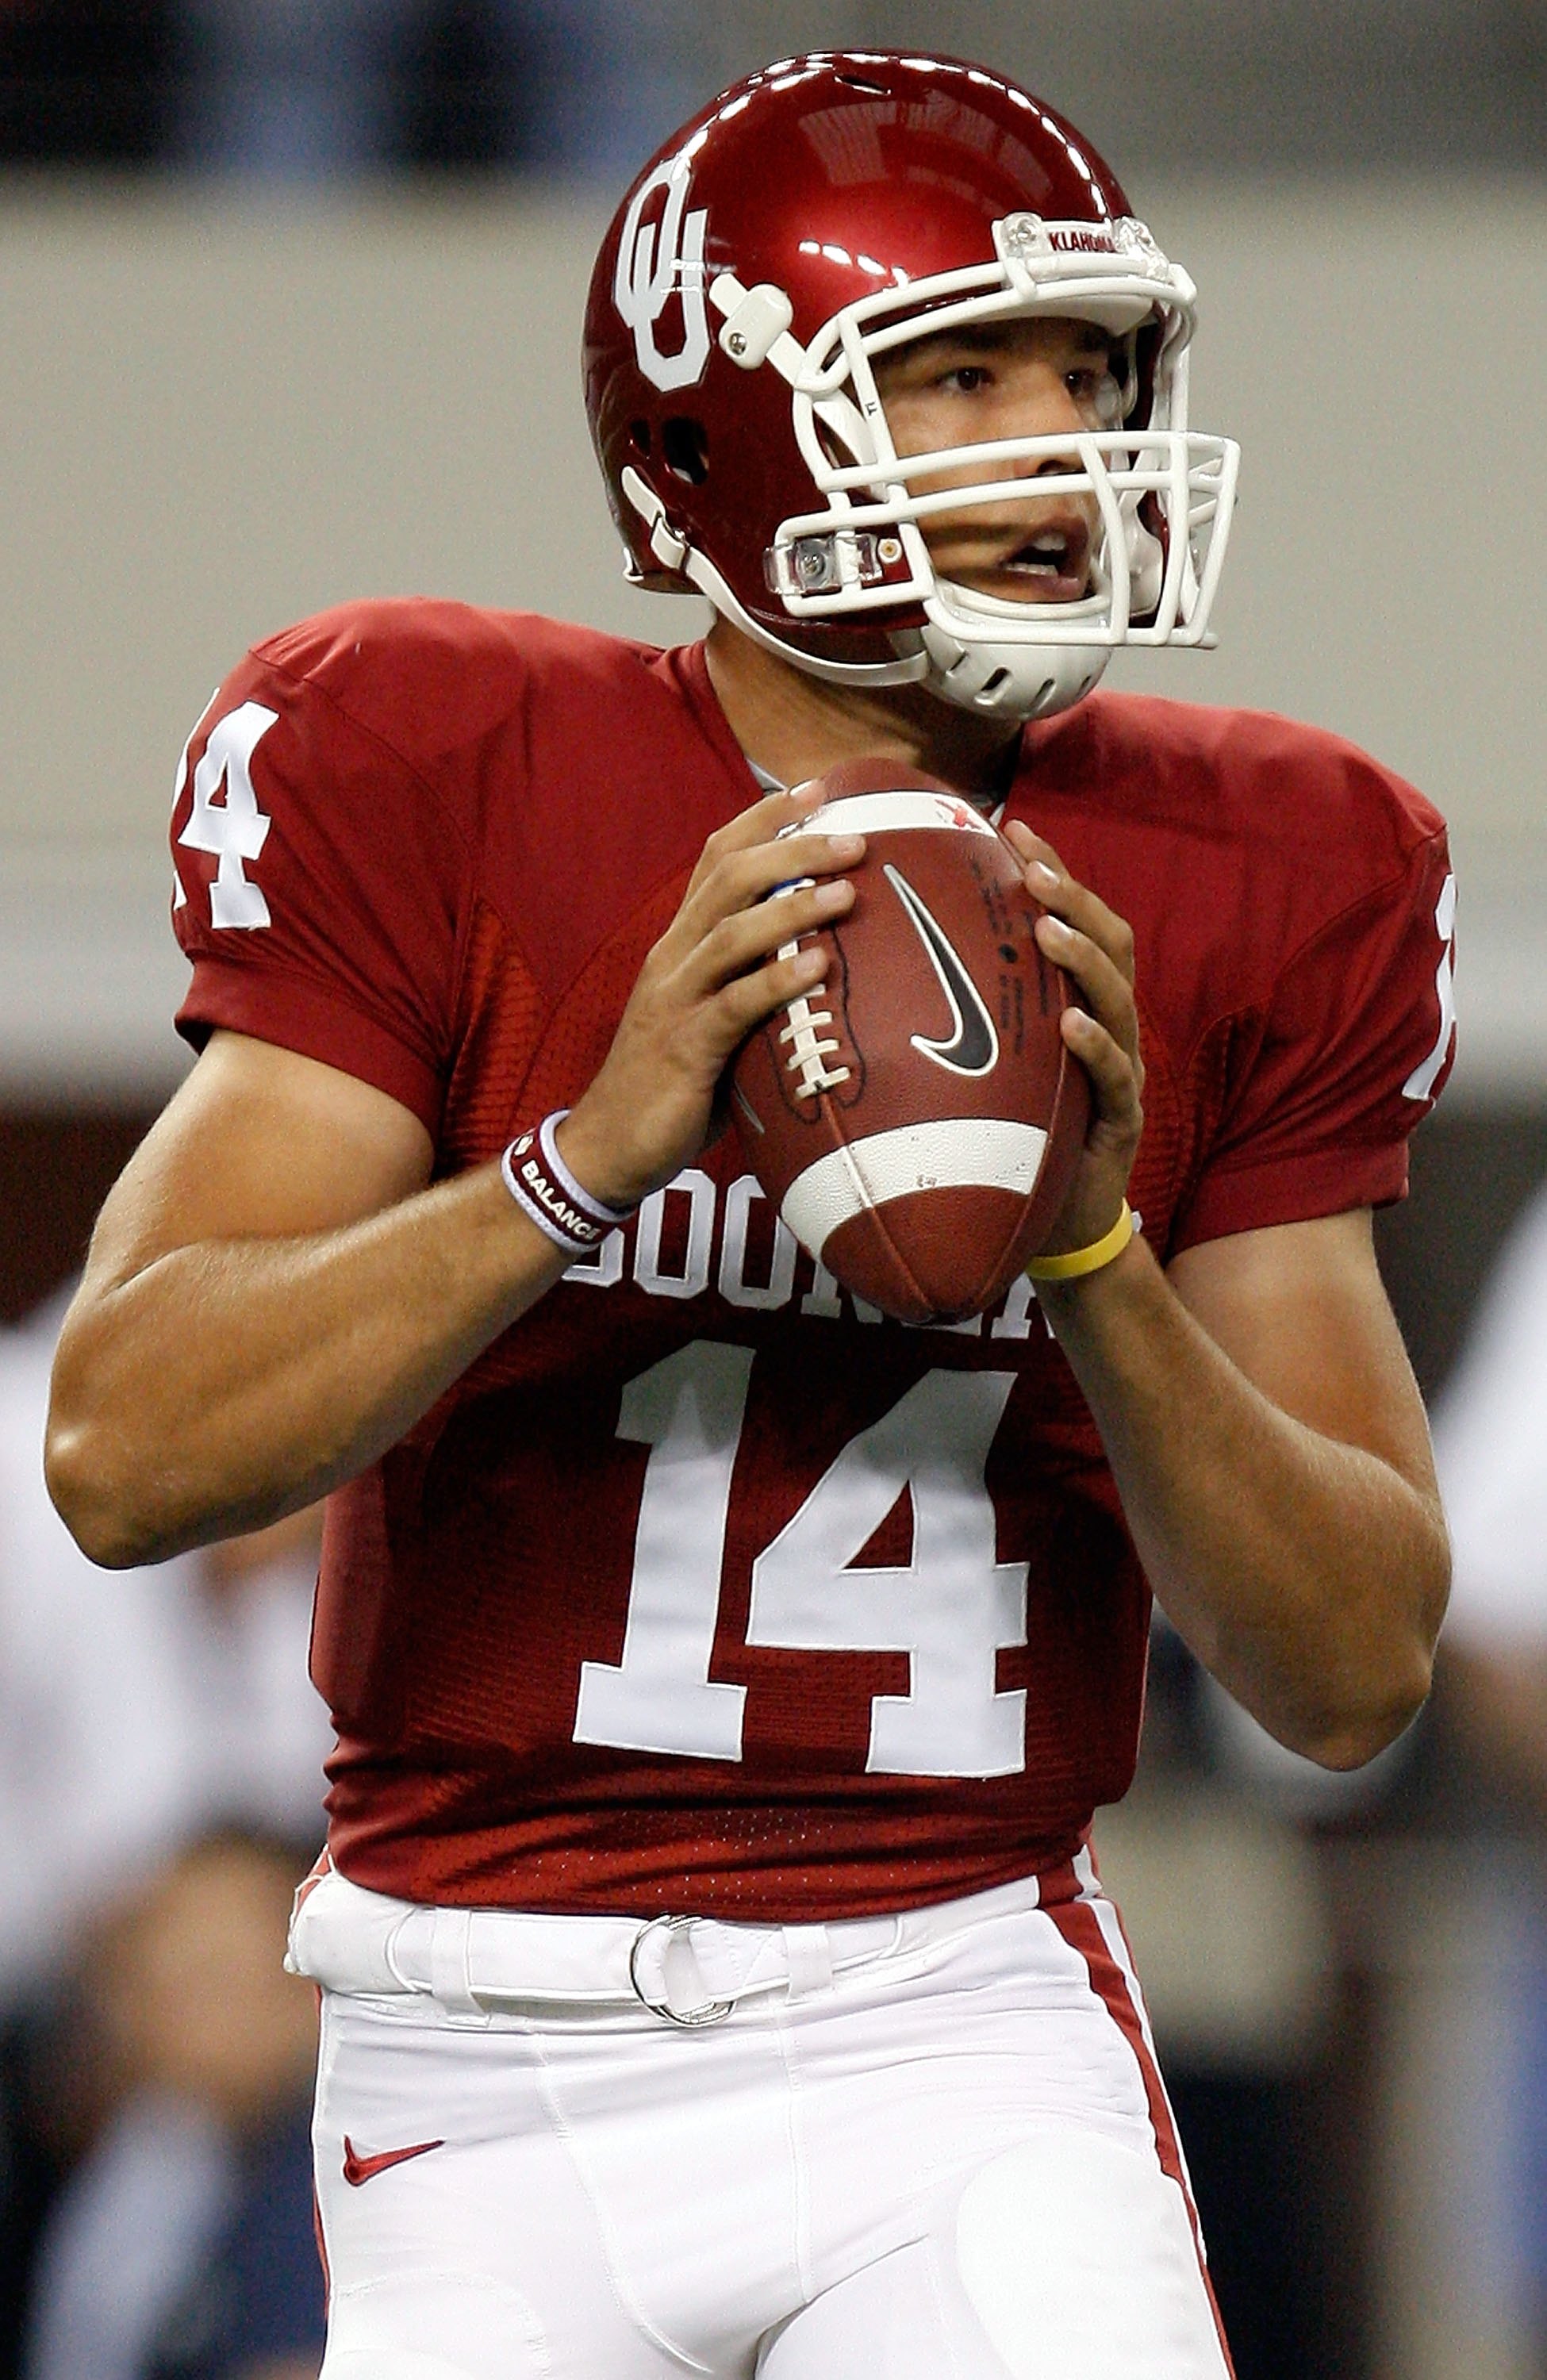 ARLINGTON, TX - SEPTEMBER 05:  Quarterback Sam Bradford #14 of the Oklahoma Sooners drops back to pass against the Brigham Young Cougars at Cowboys Stadium on September 5, 2009 in Arlington, Texas.  (Photo by Ronald Martinez/Getty Images)